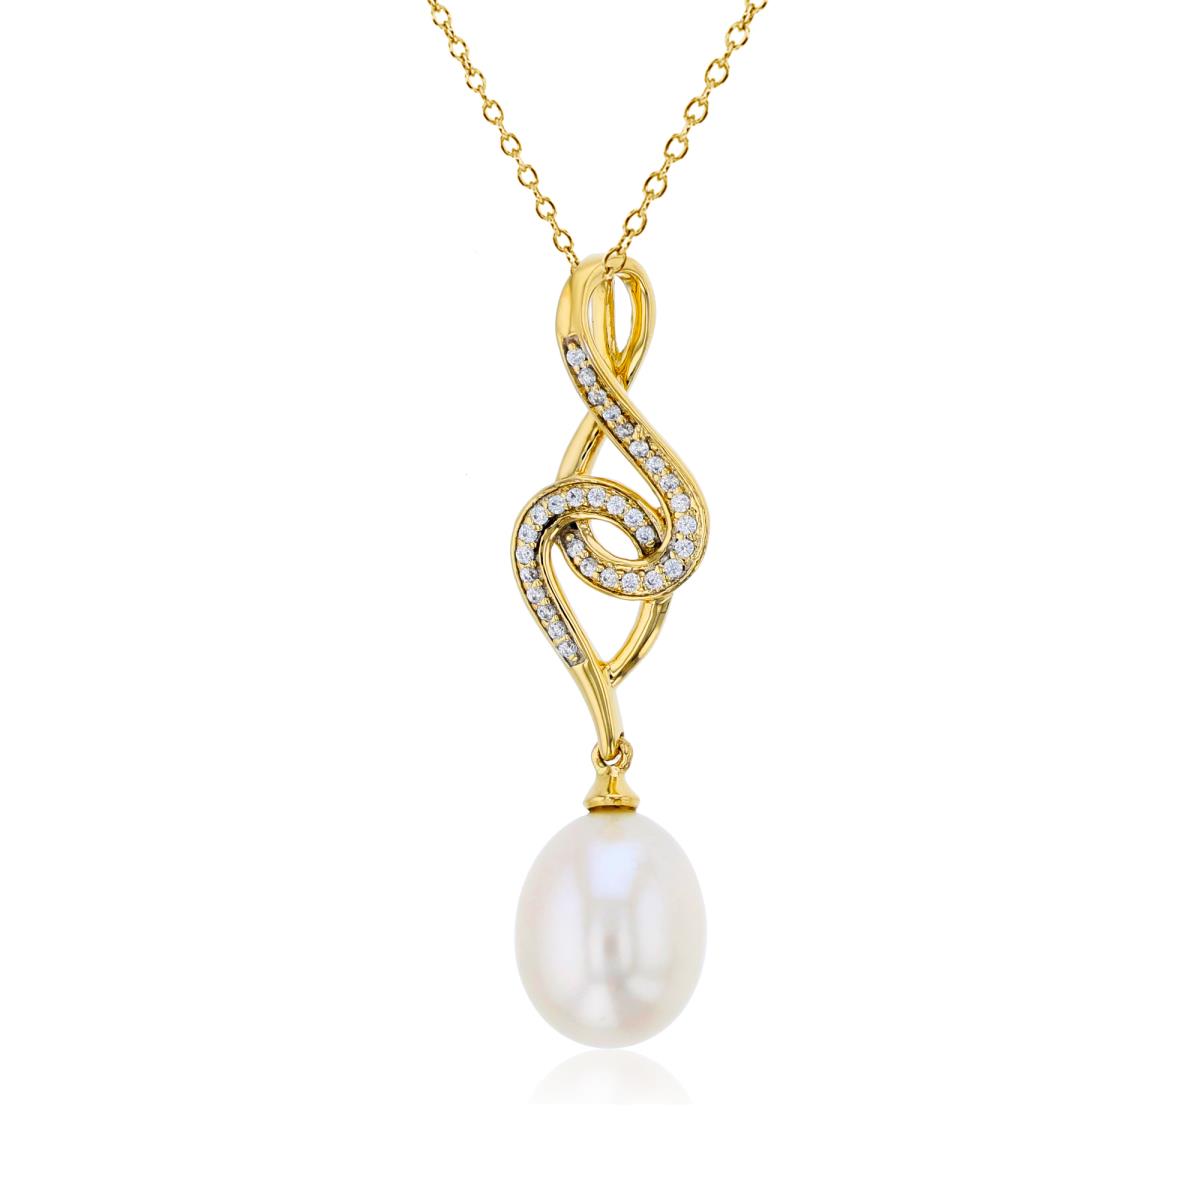 14K Yellow Gold 0.12 CTTW Rnd Diam & 11X9 mm TD White Pearl Drop Dangling 18"Necklace